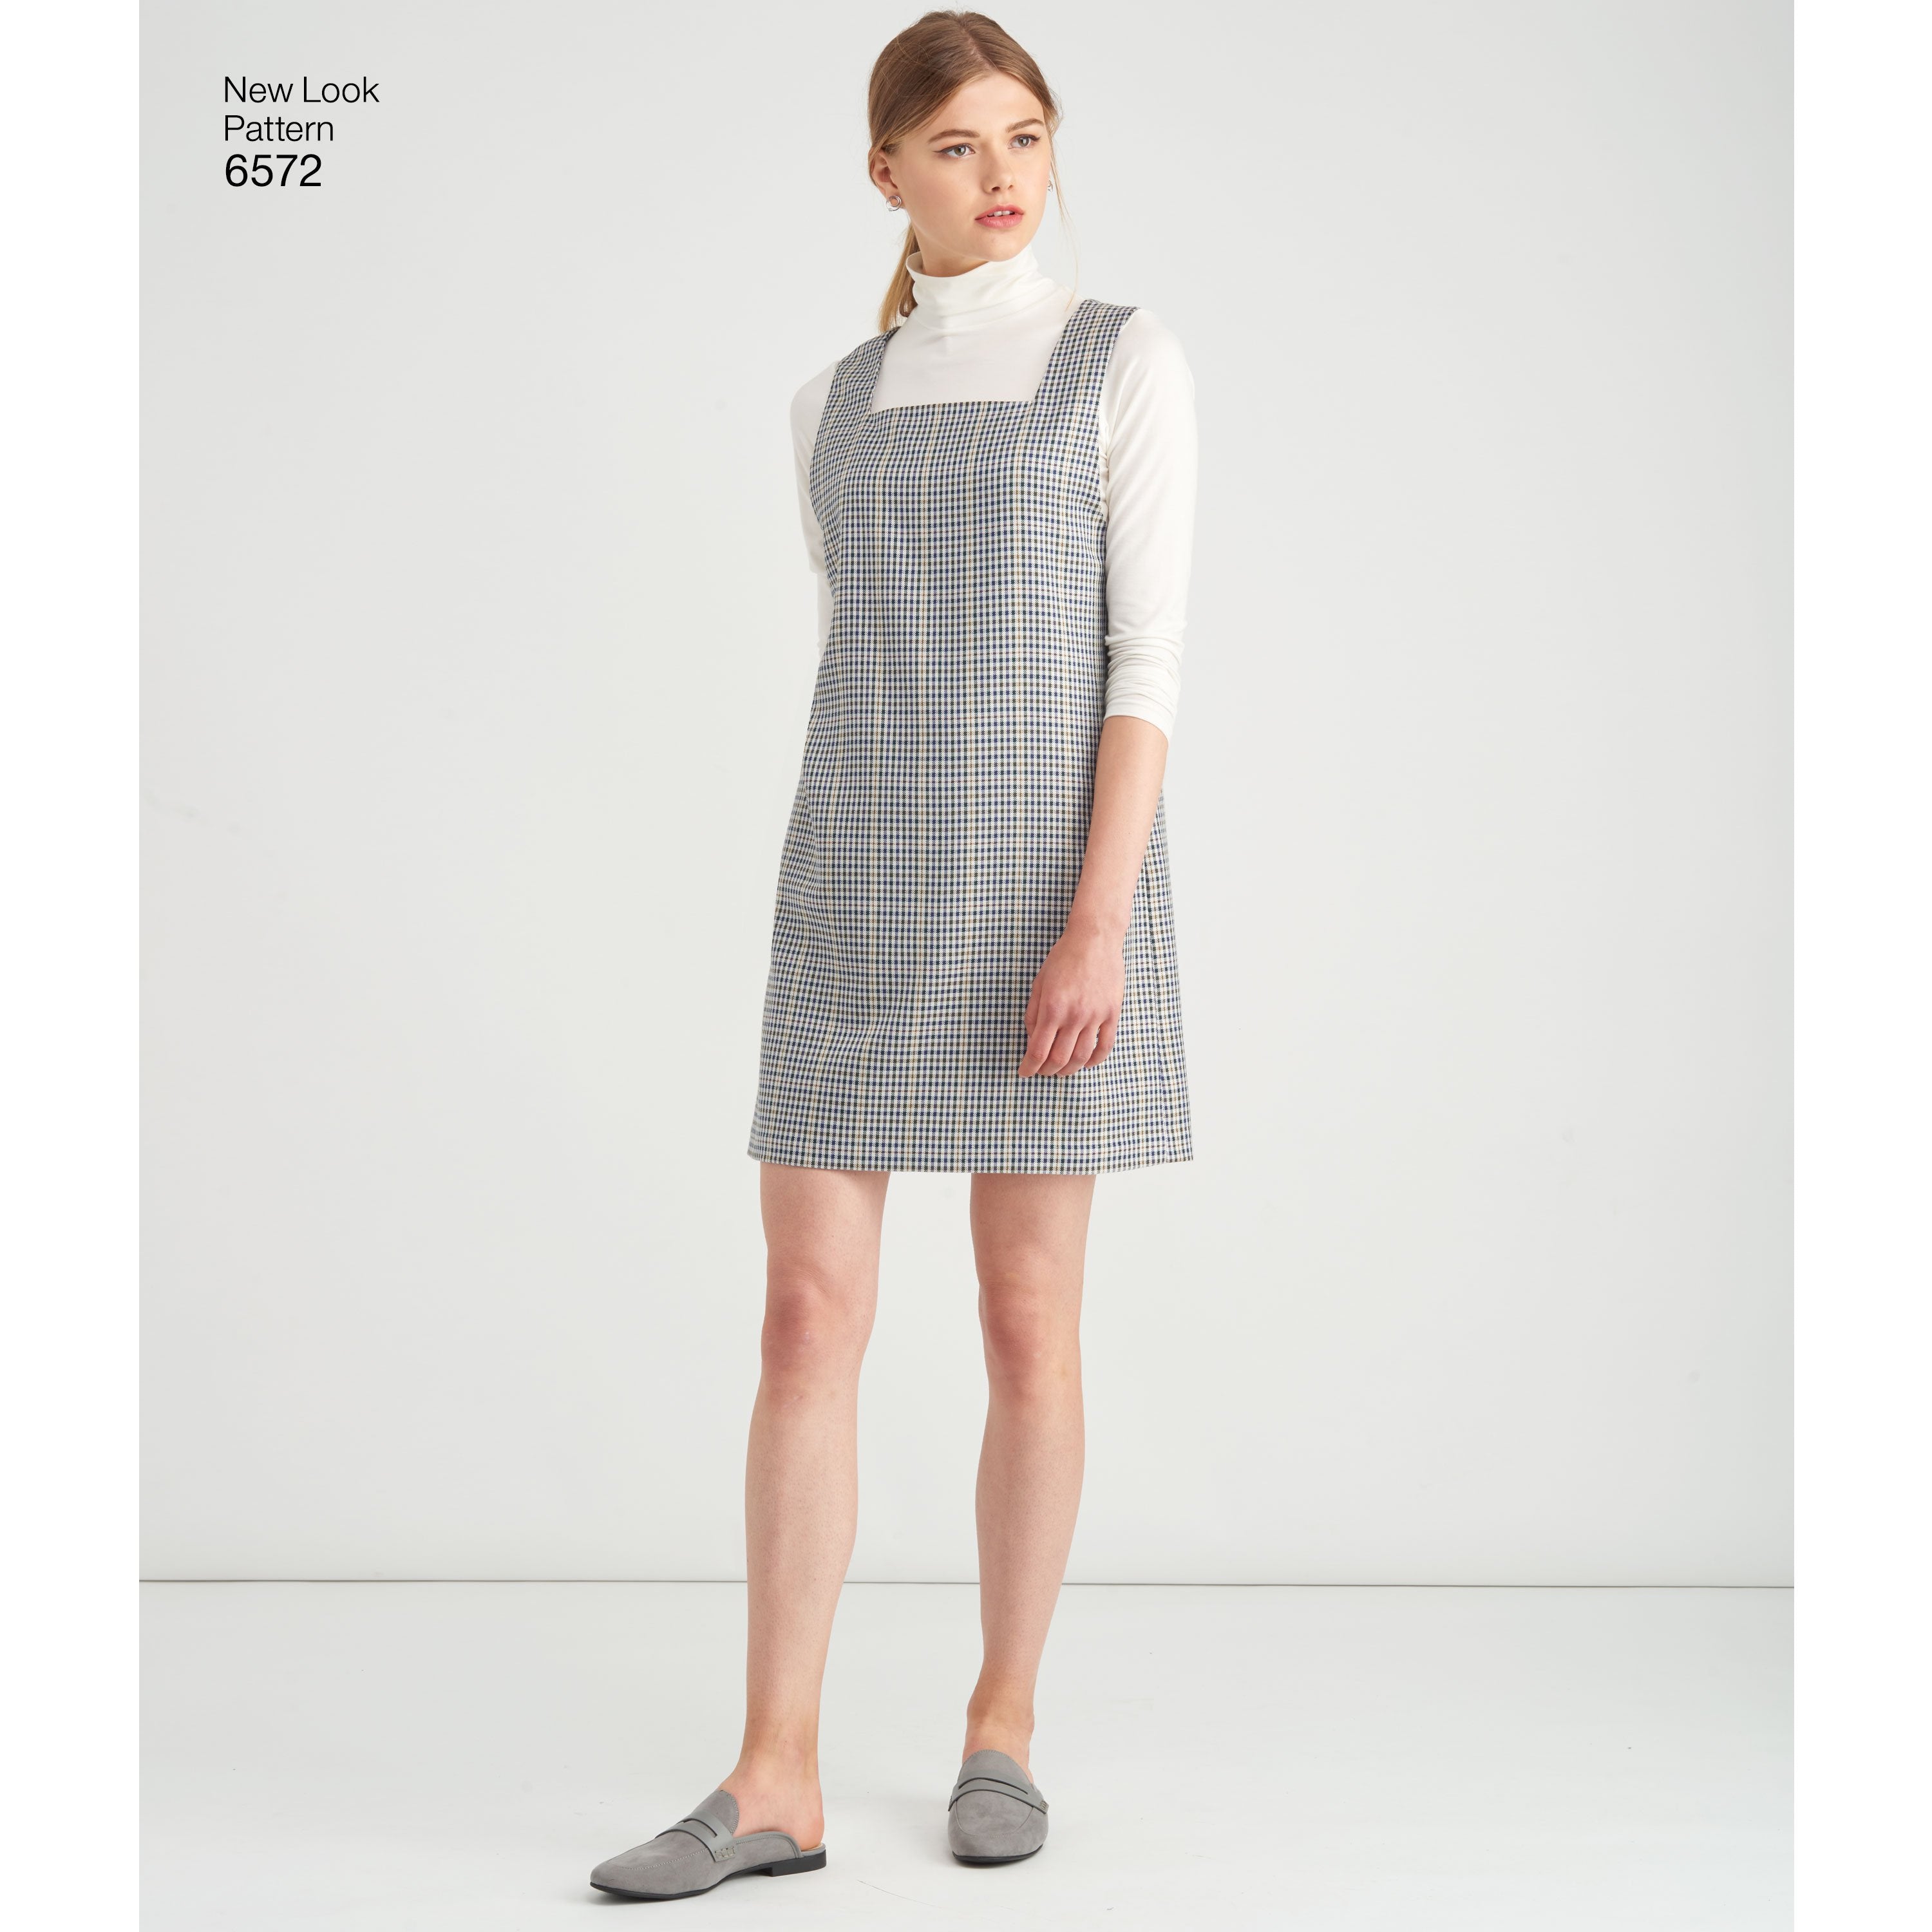 NL6572 Jumper Dress sewing pattern from Jaycotts Sewing Supplies